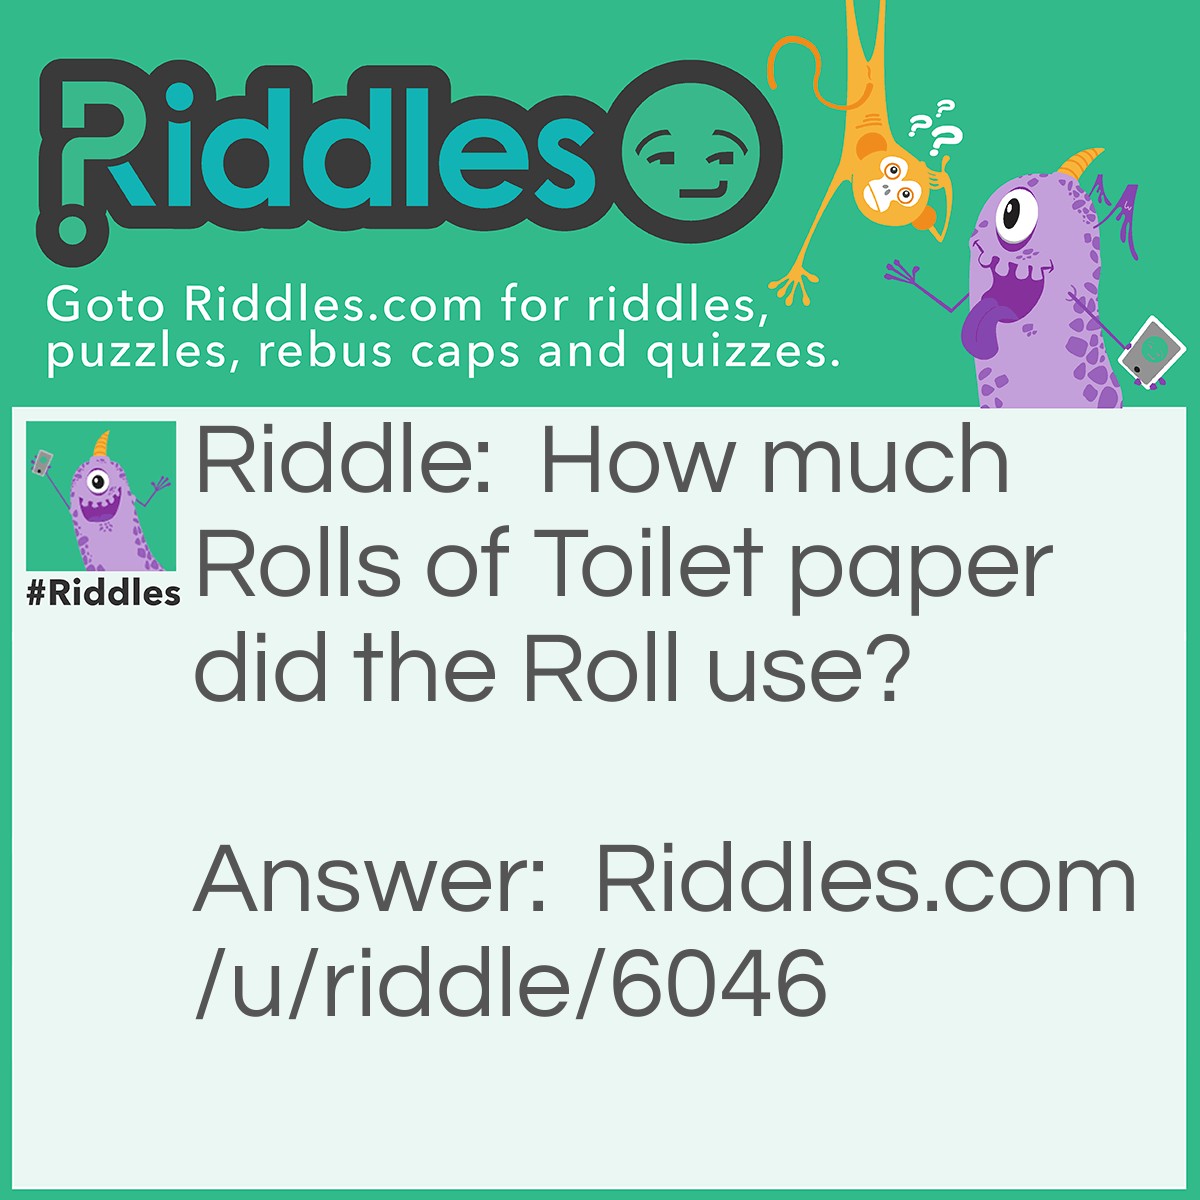 Riddle: How much Rolls of Toilet paper did the Roll use? Answer: It used Rolls of Roles